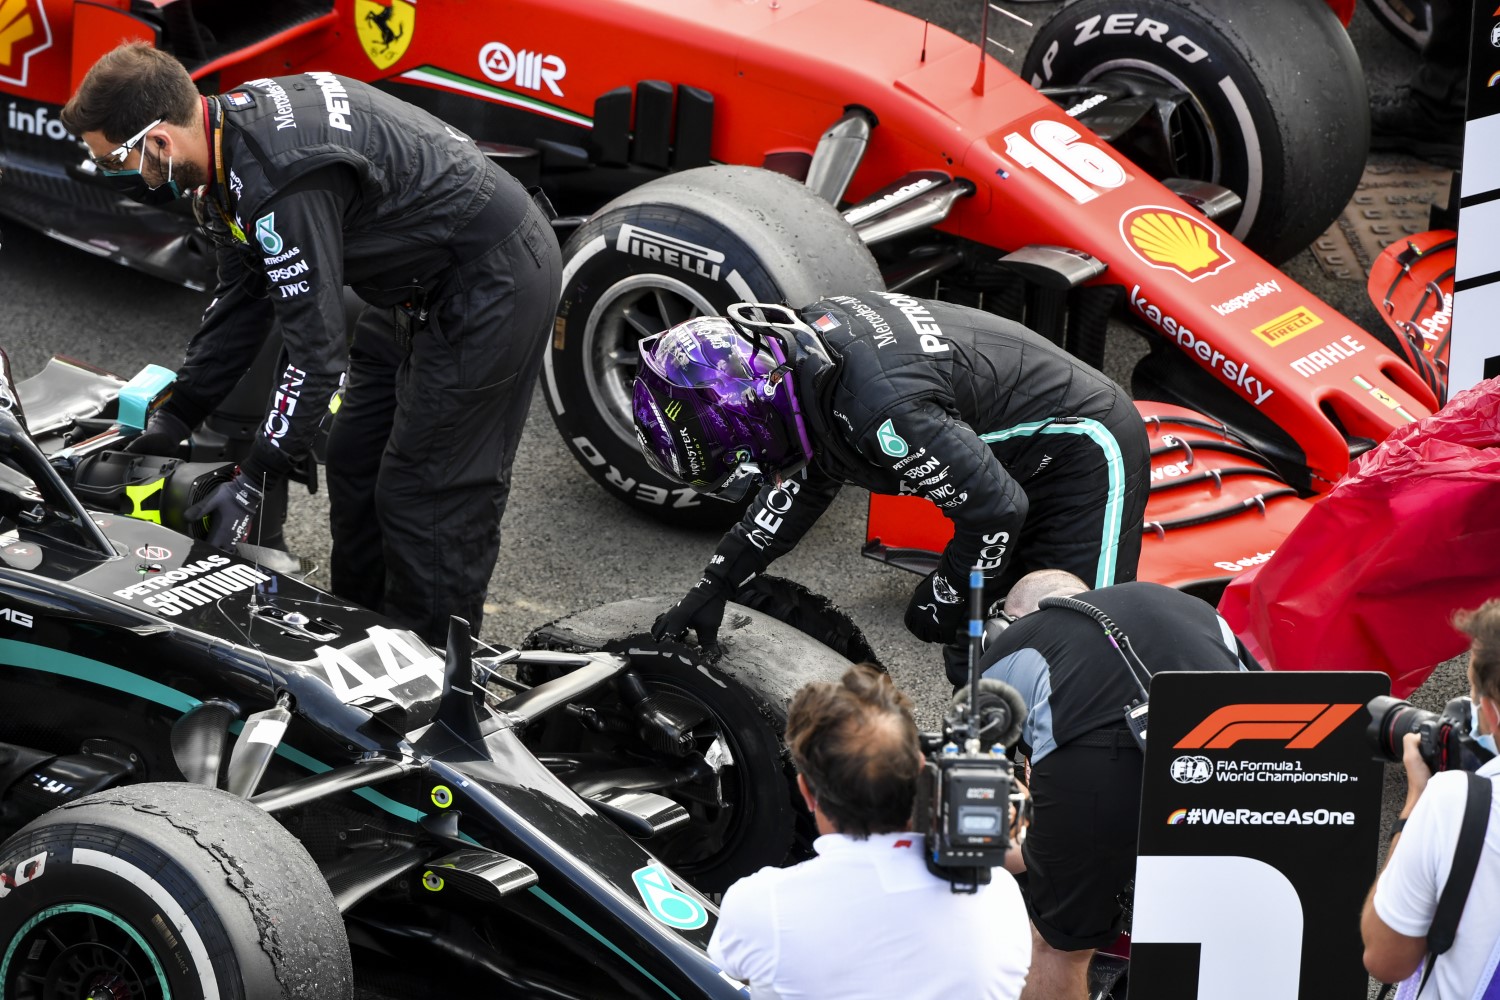 Hamilton examines his blown Pirelli. The cars that generate the most downforce - Mercedes and McLaren - blew out their tires